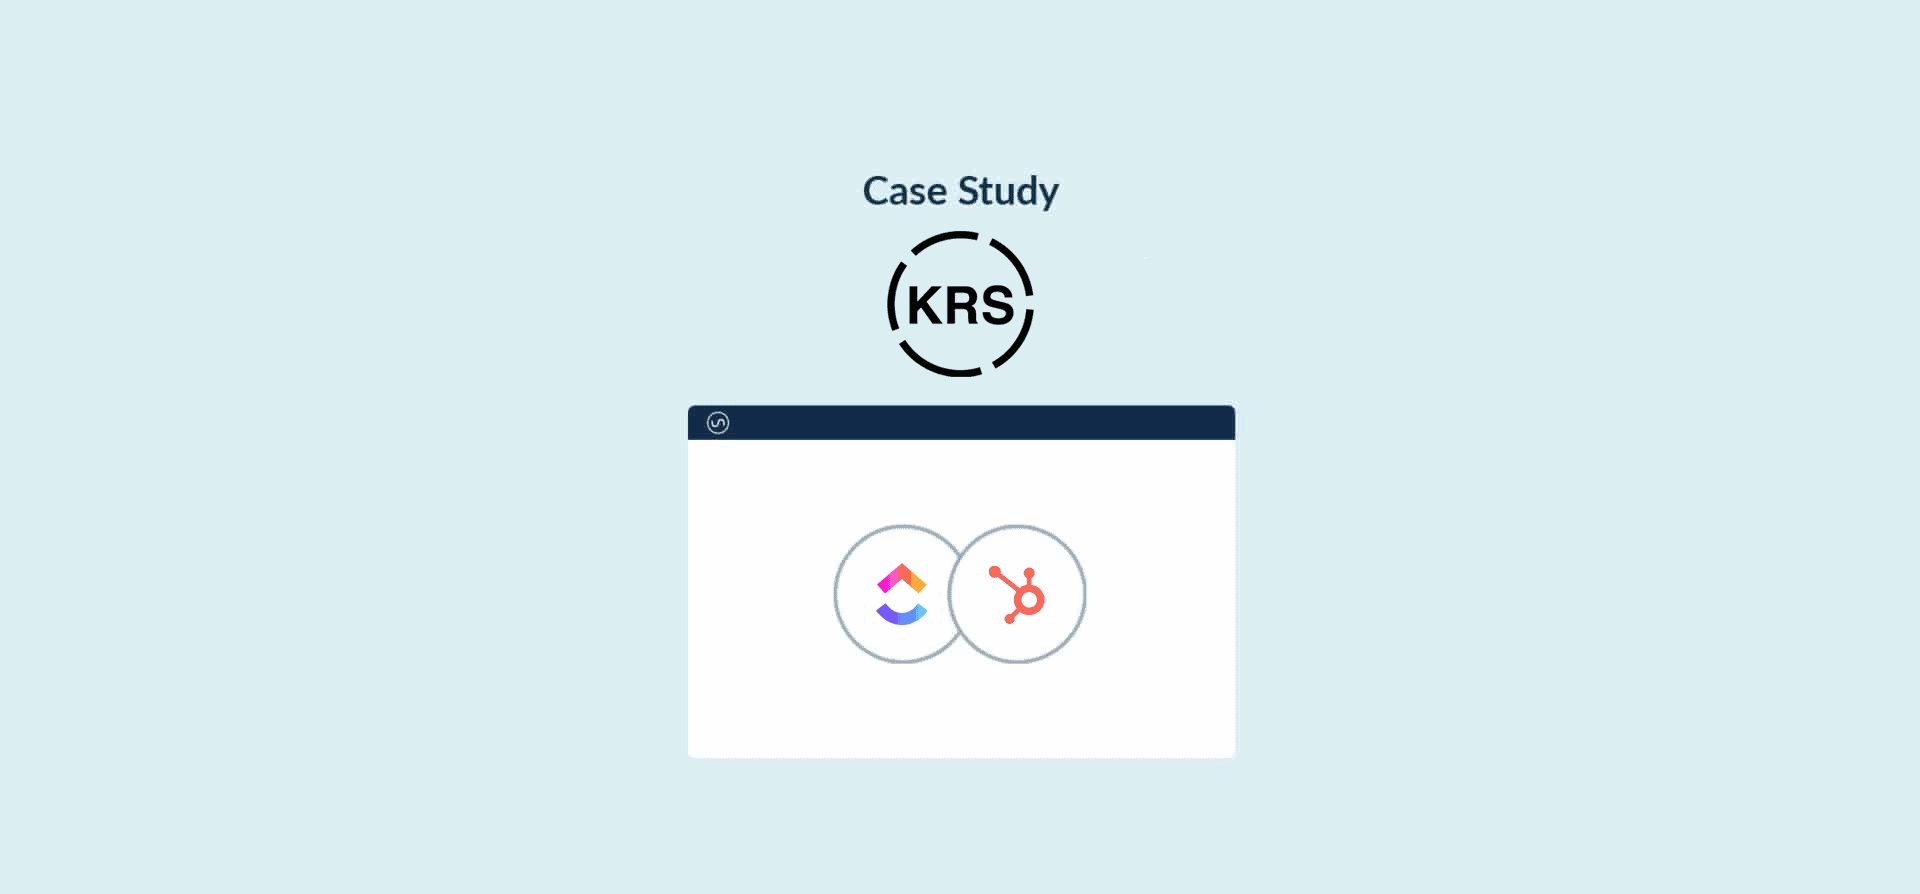 Logos for KRS, HubSpot, and ClickUp, for the KRS case study.